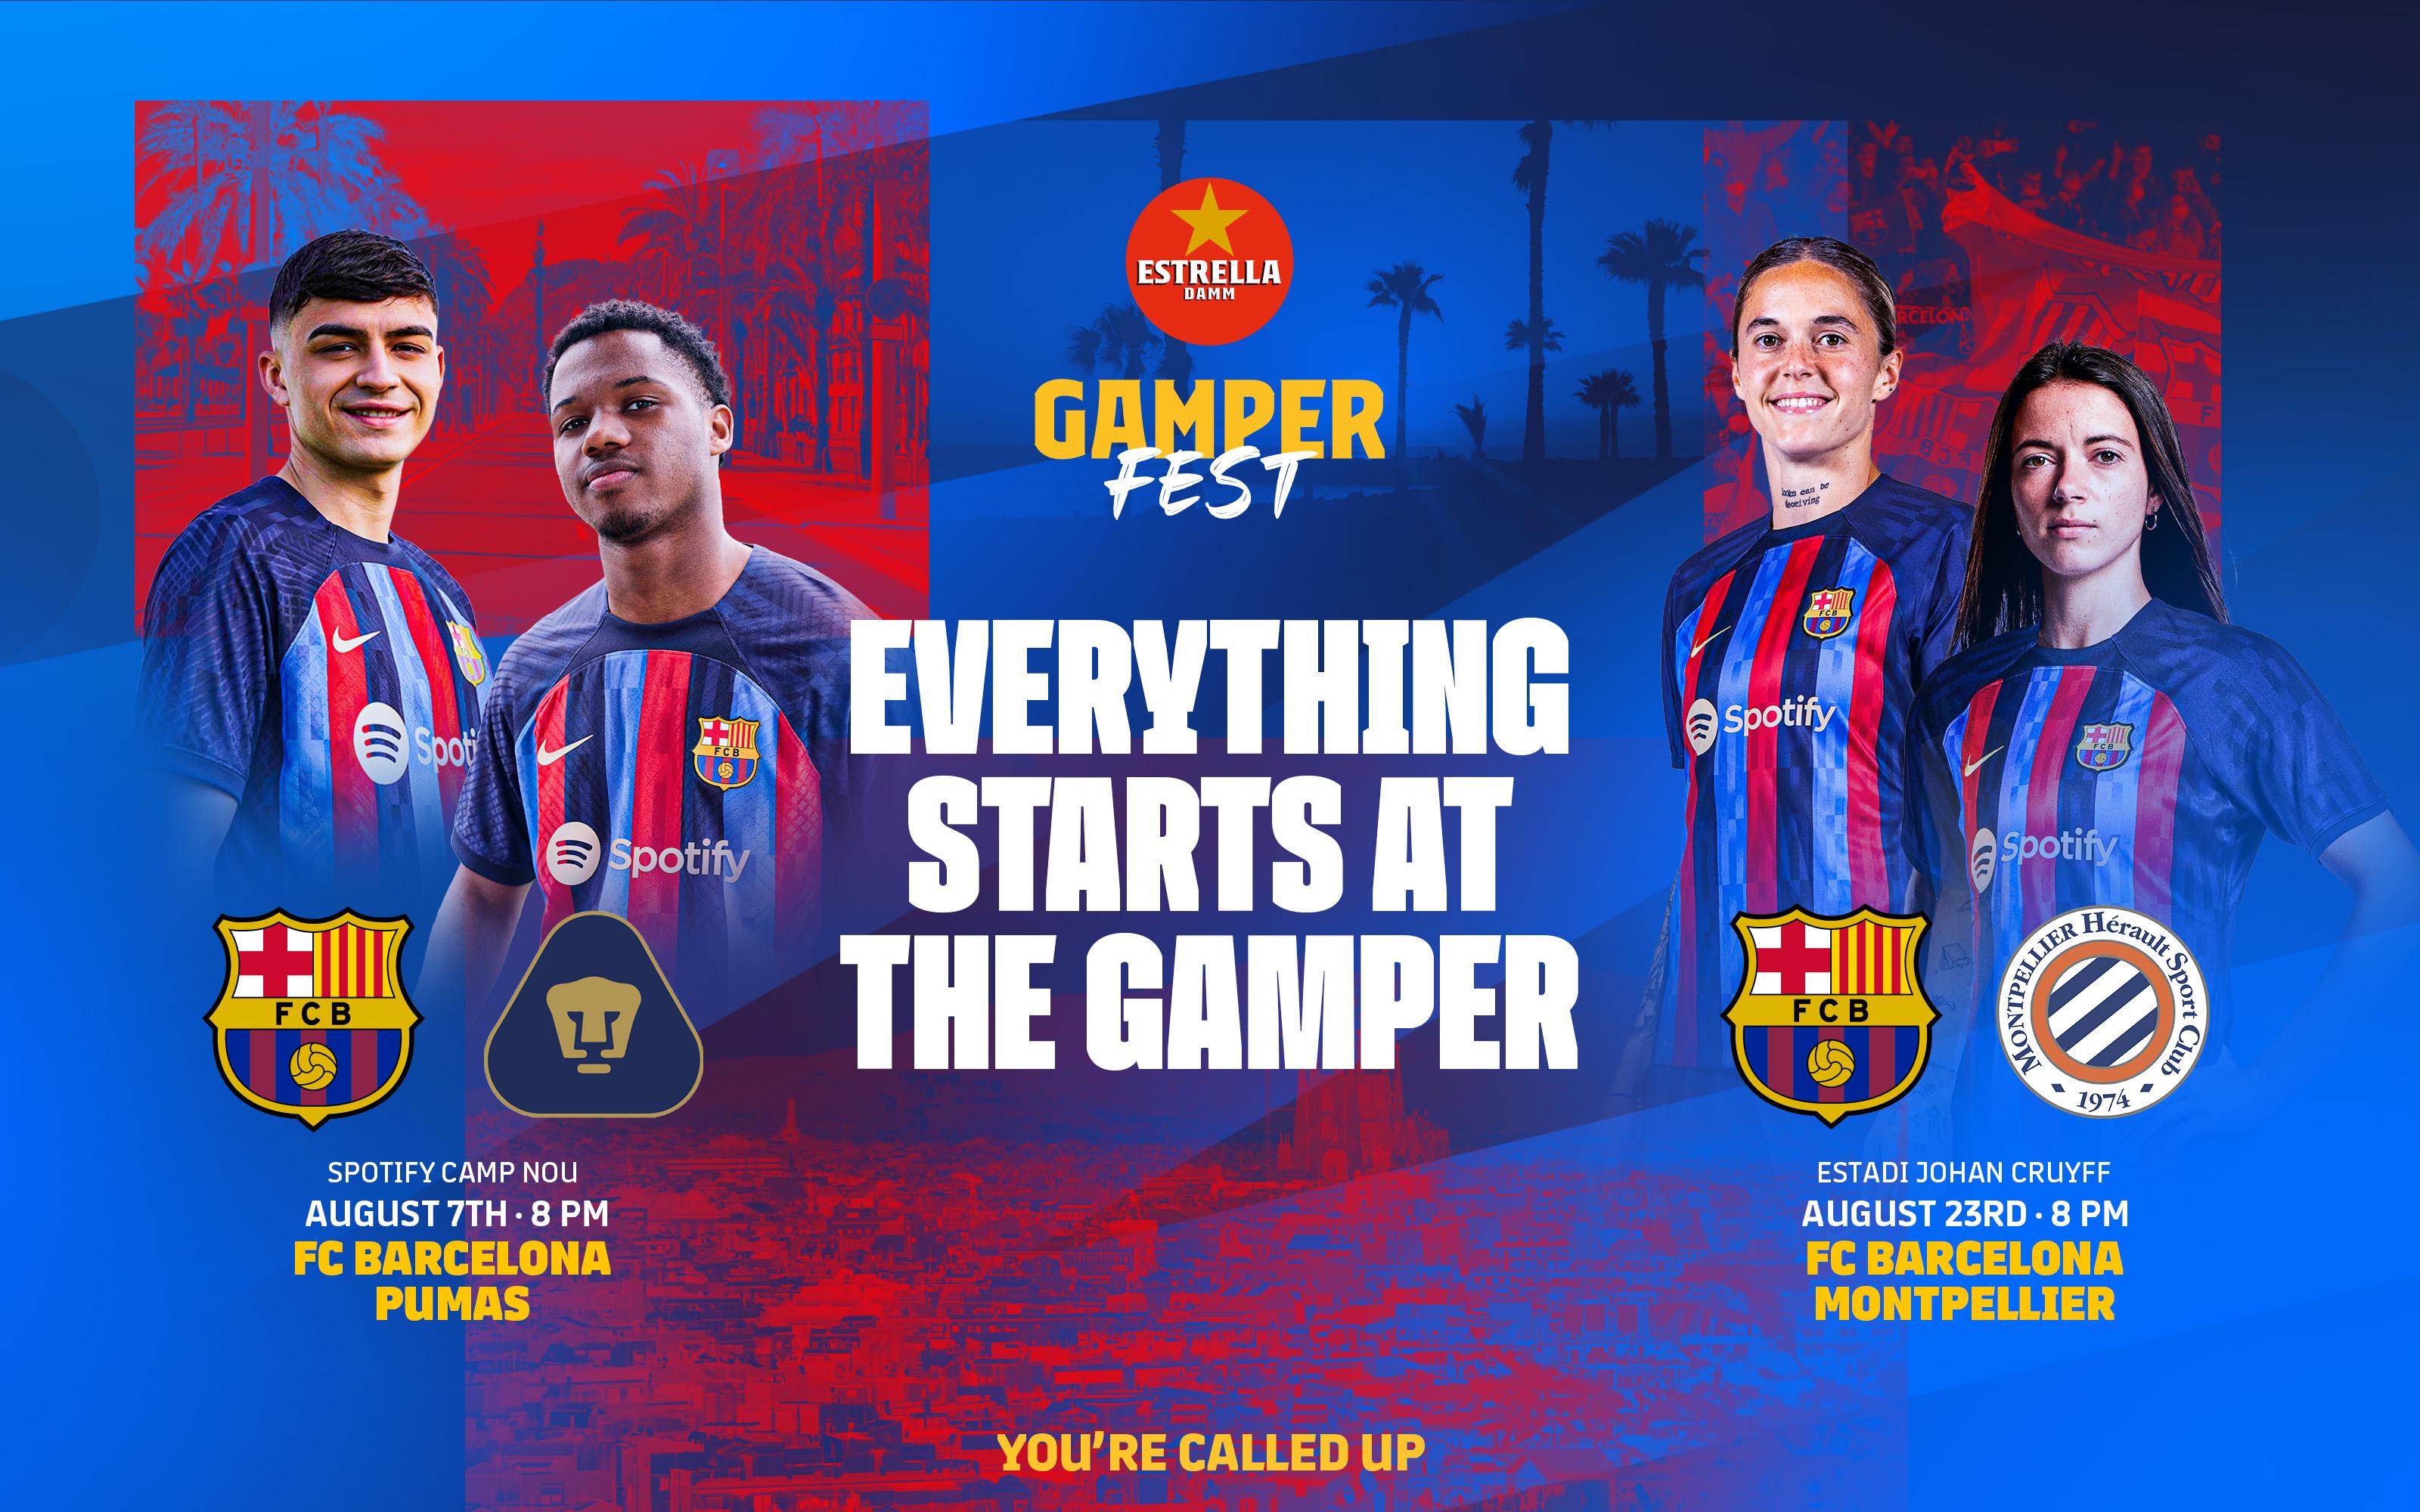 Tickets for the Joan Gamper Trophy now on sale